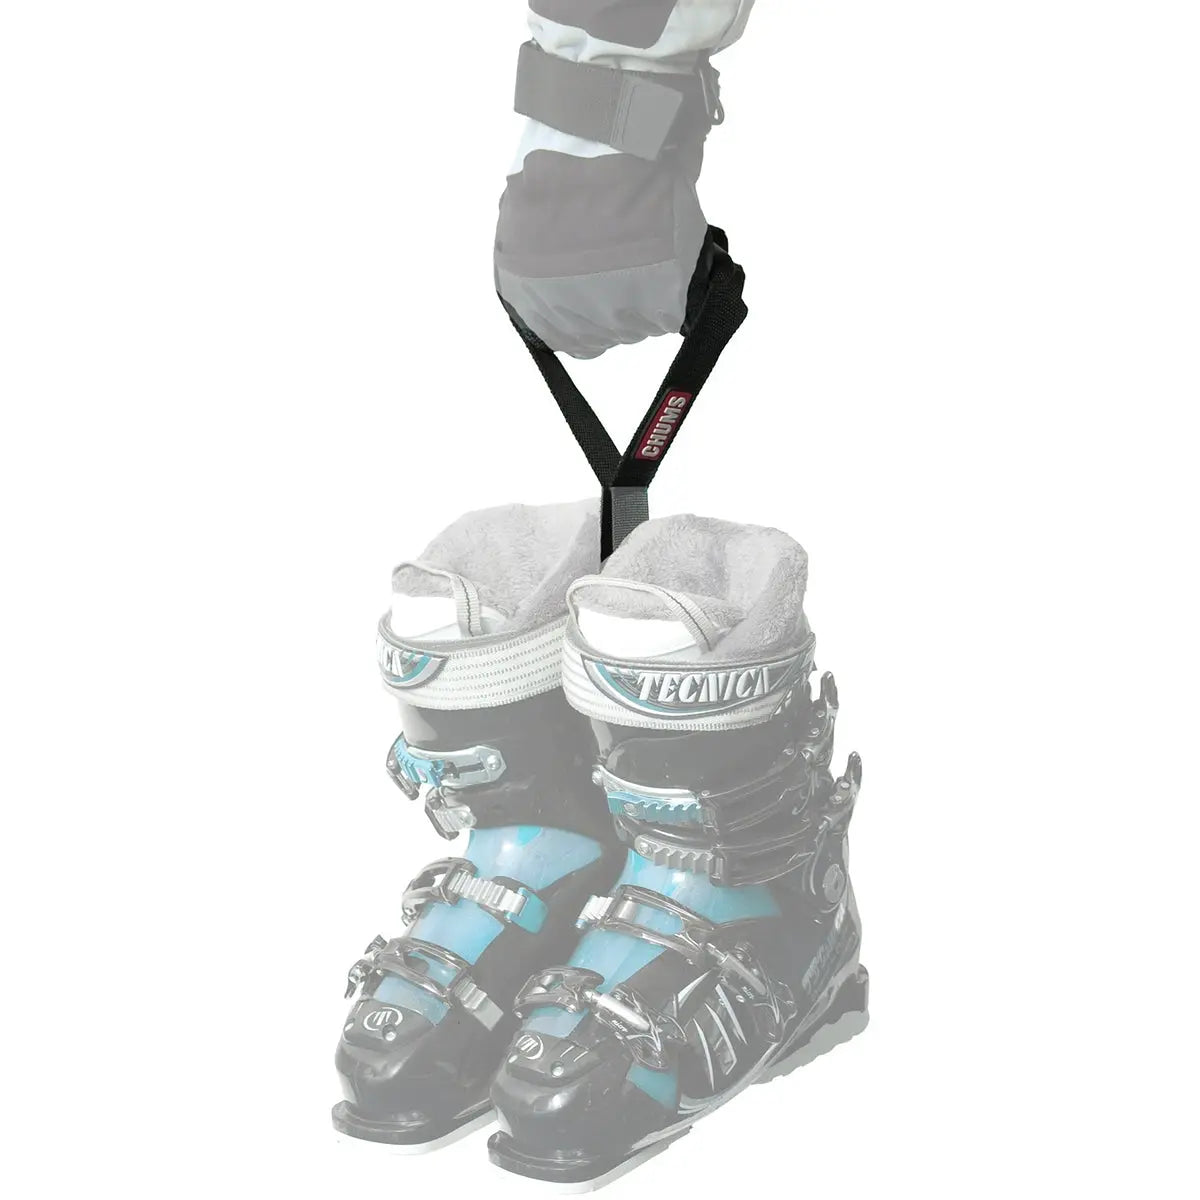 Chums Ski and Snowboard Boot Tote Holder - Black Chums